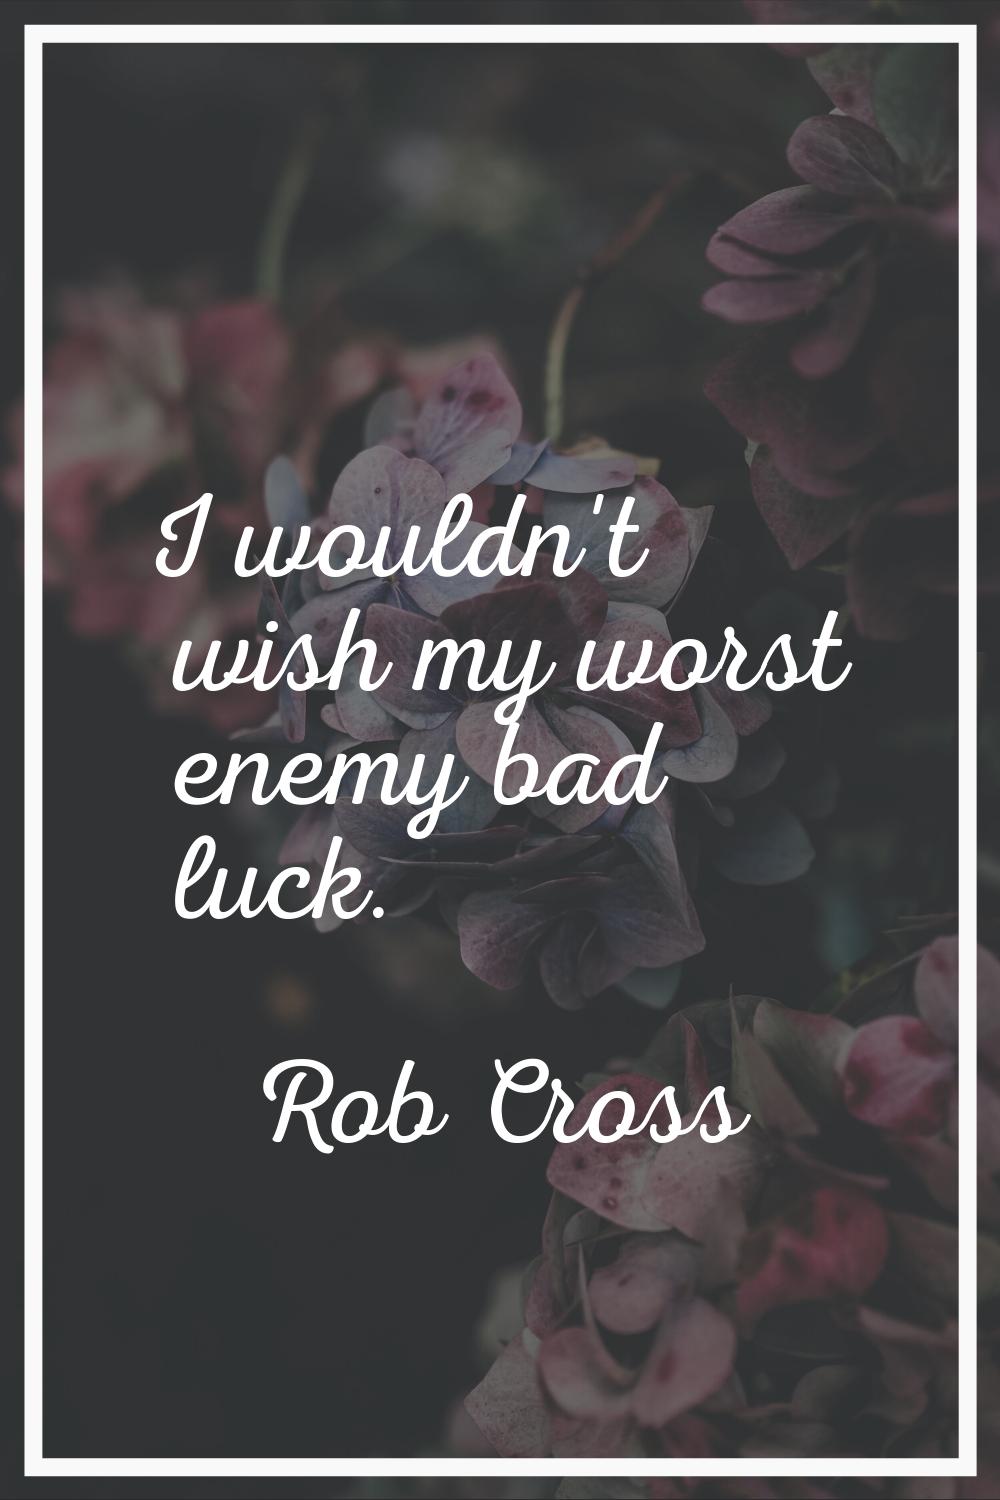 I wouldn't wish my worst enemy bad luck.